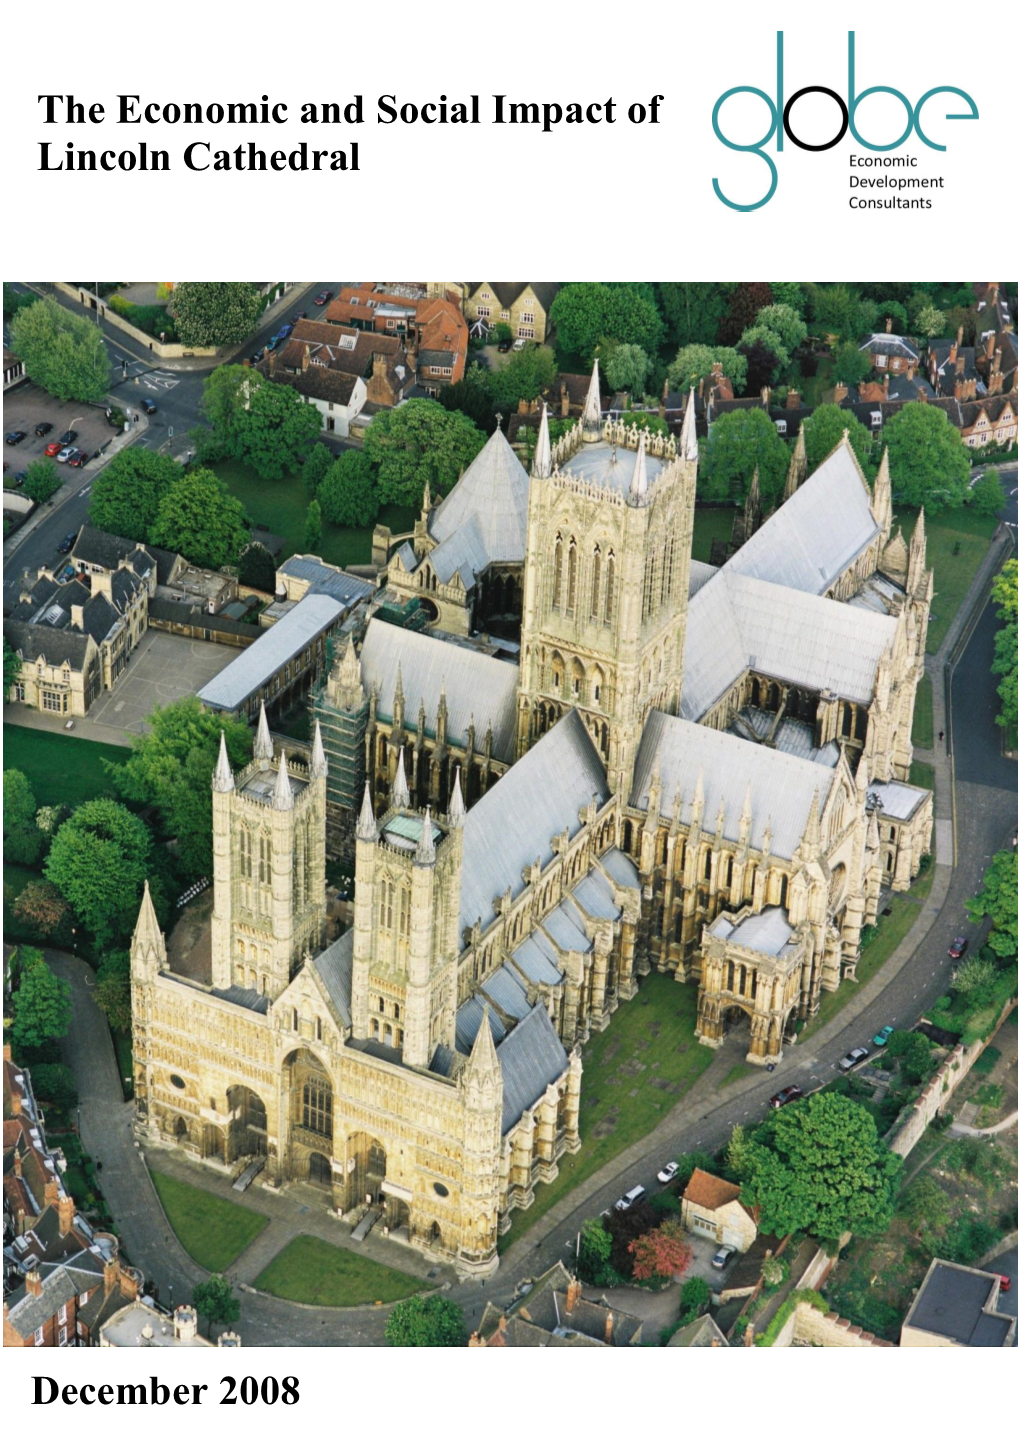 The Economic and Social Impact of Lincoln Cathedral December 2008